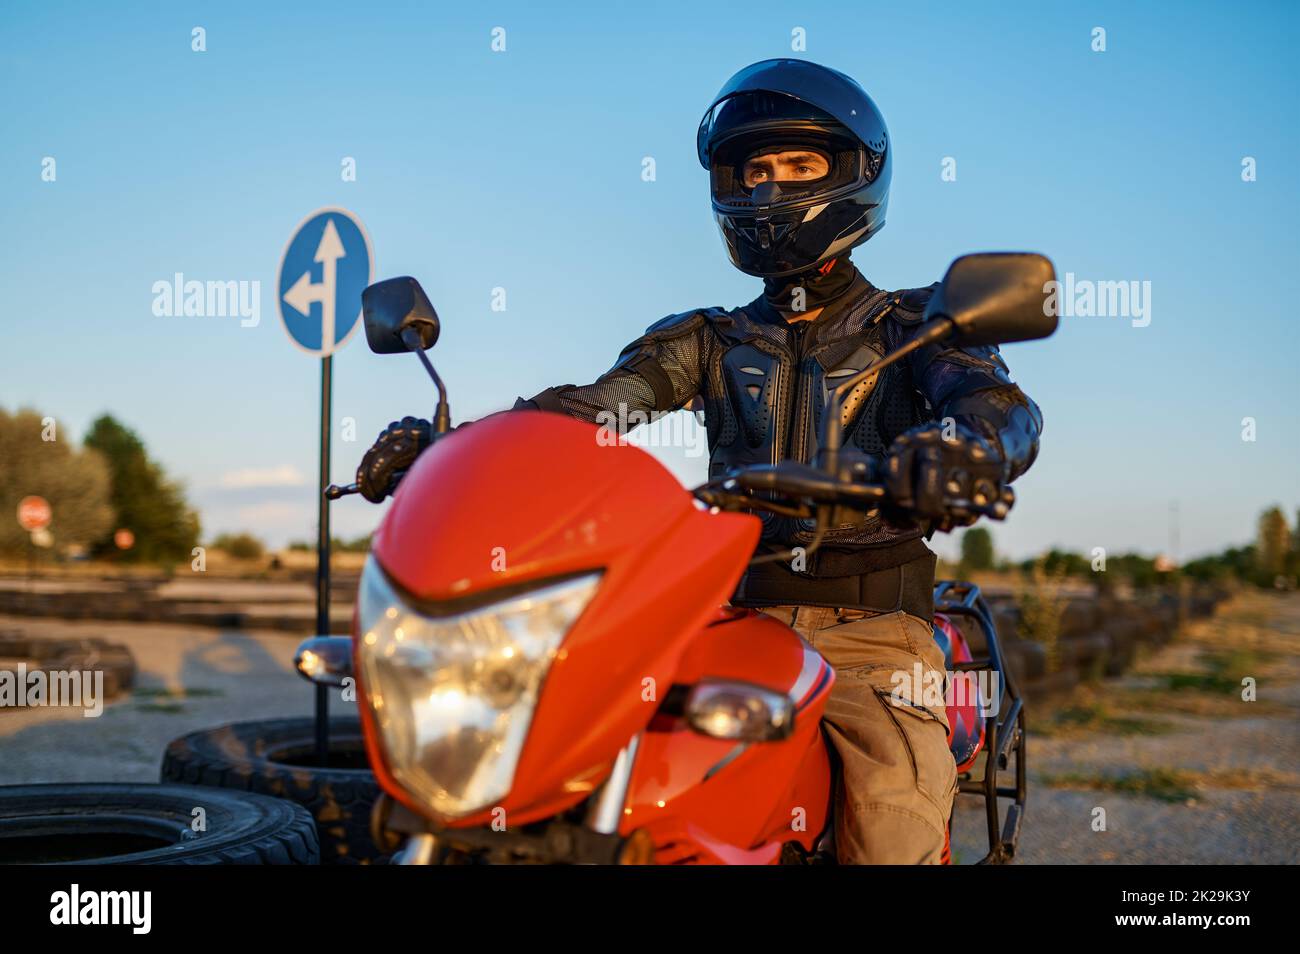 Man on motorbike, front view, motorcycle school Stock Photo